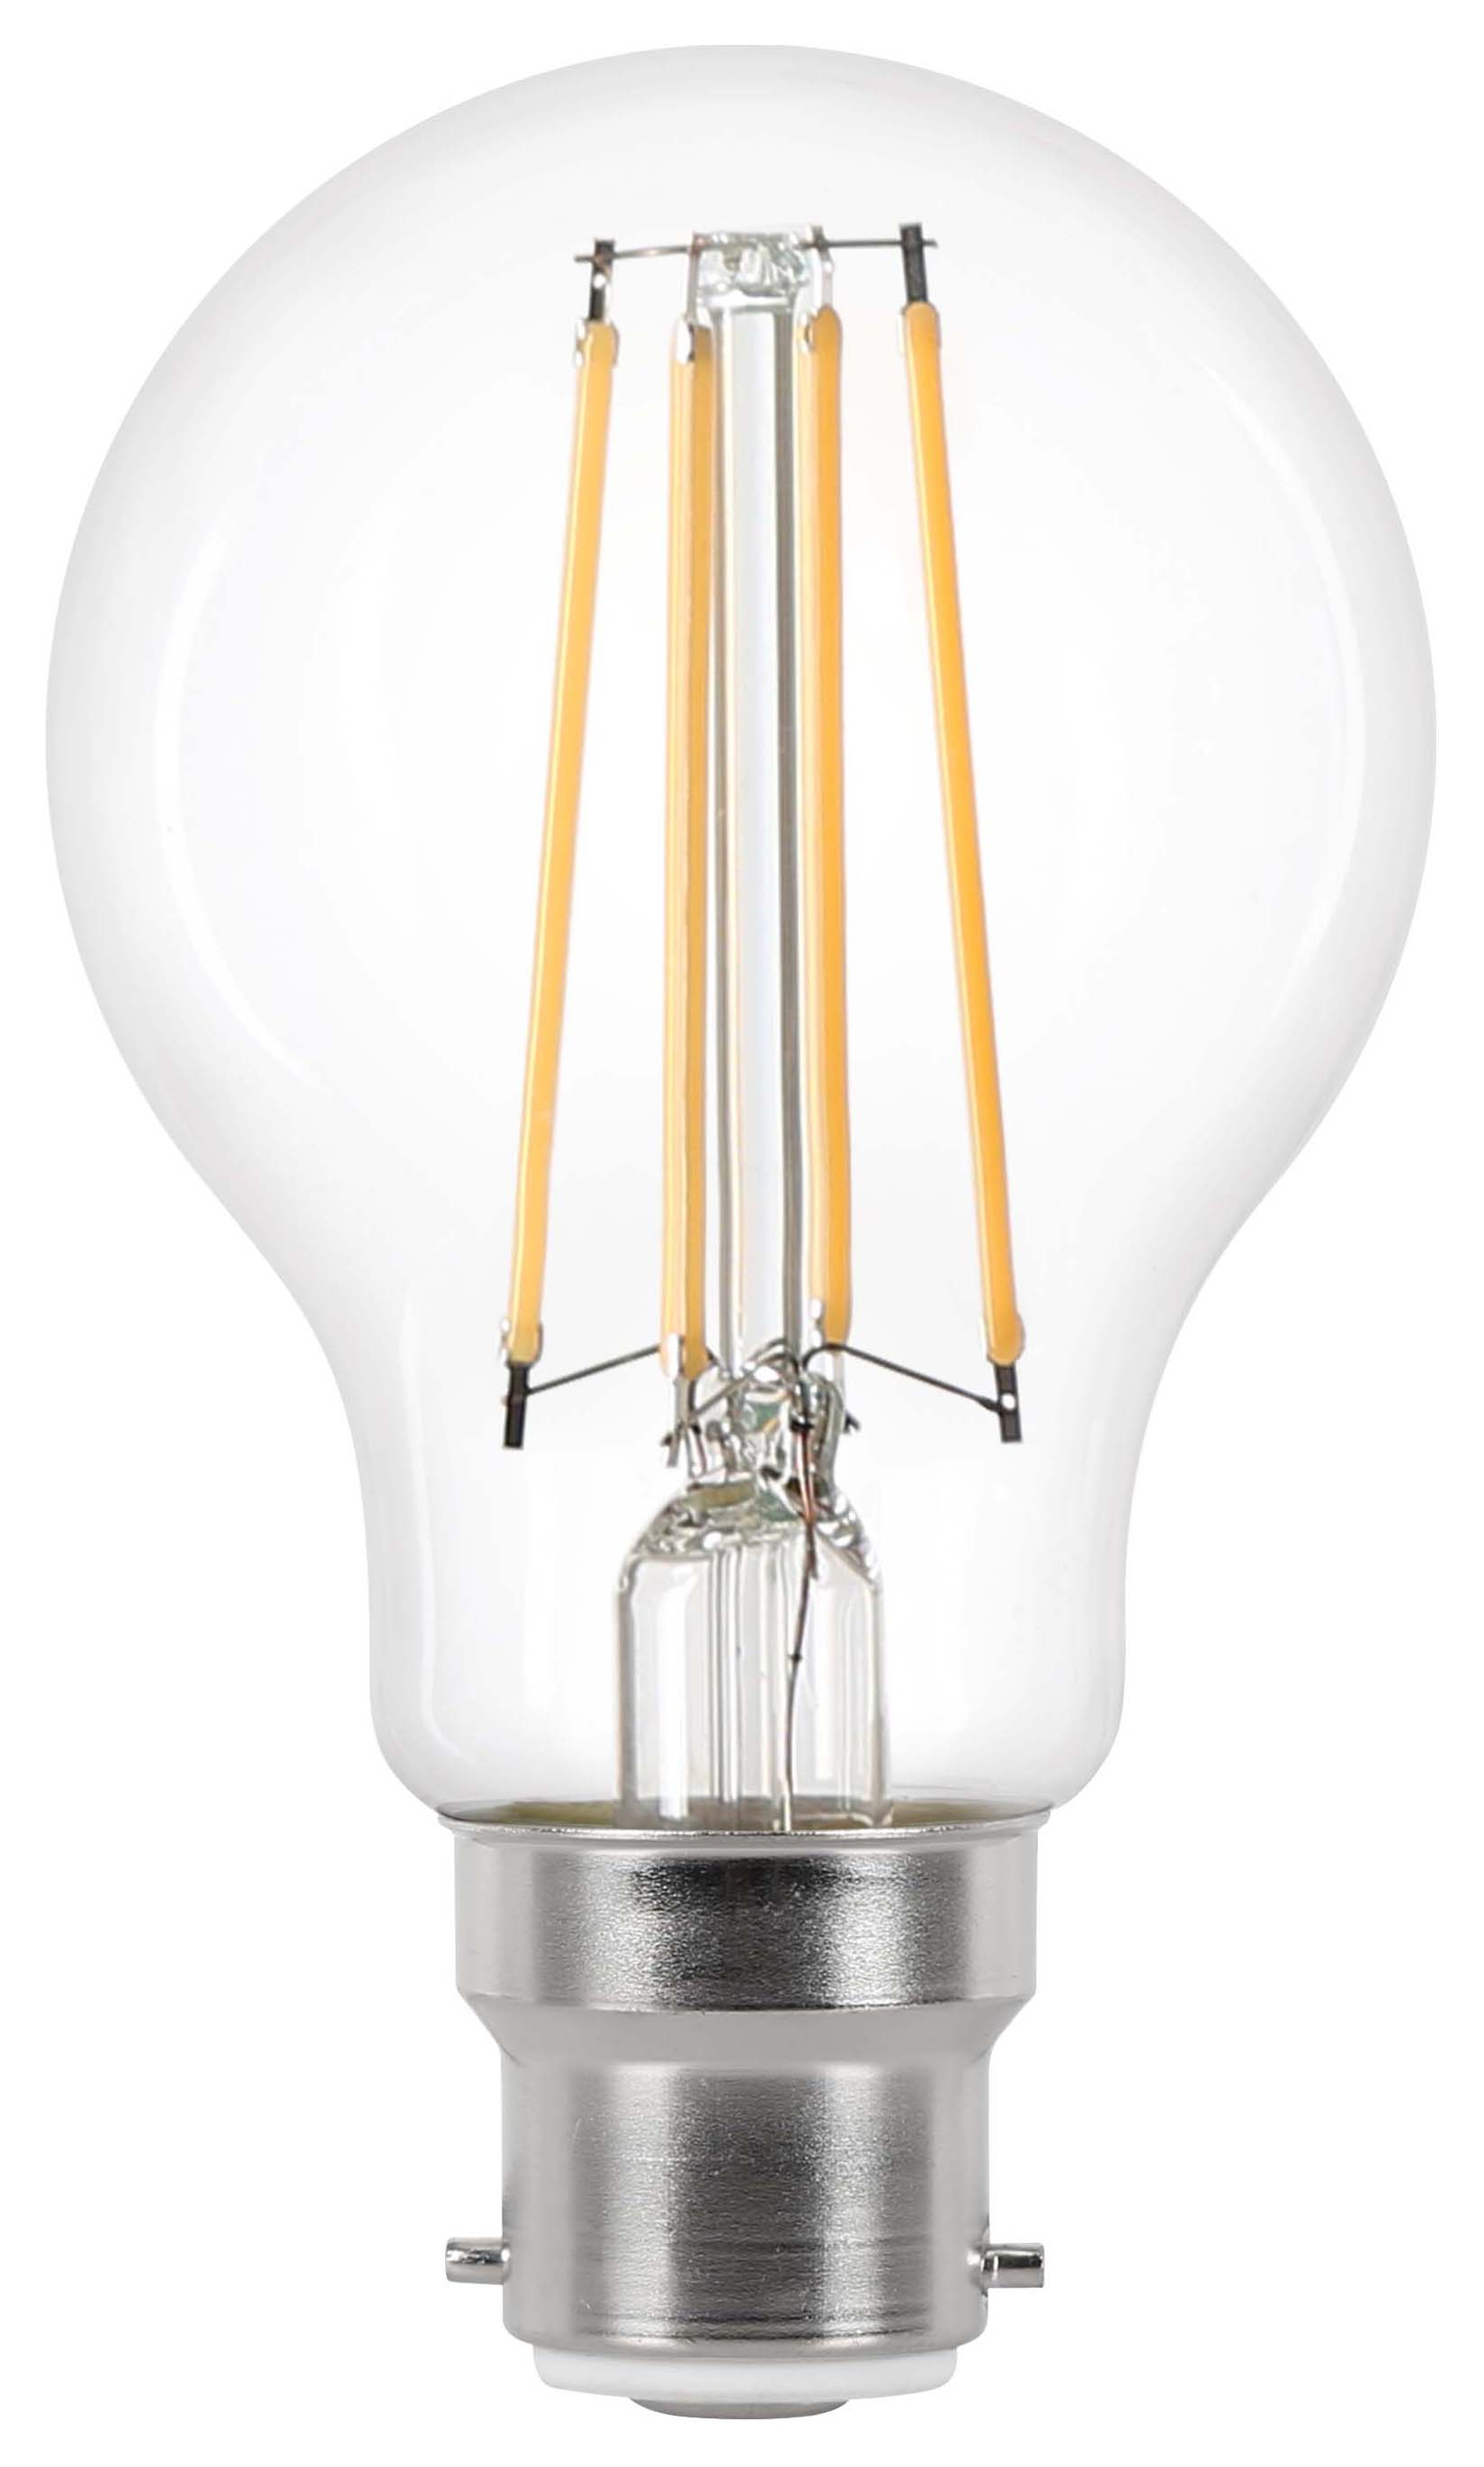 Image of Wickes Non-Dimmable GLS Filament B22 5.9W Warm White Light Bulb